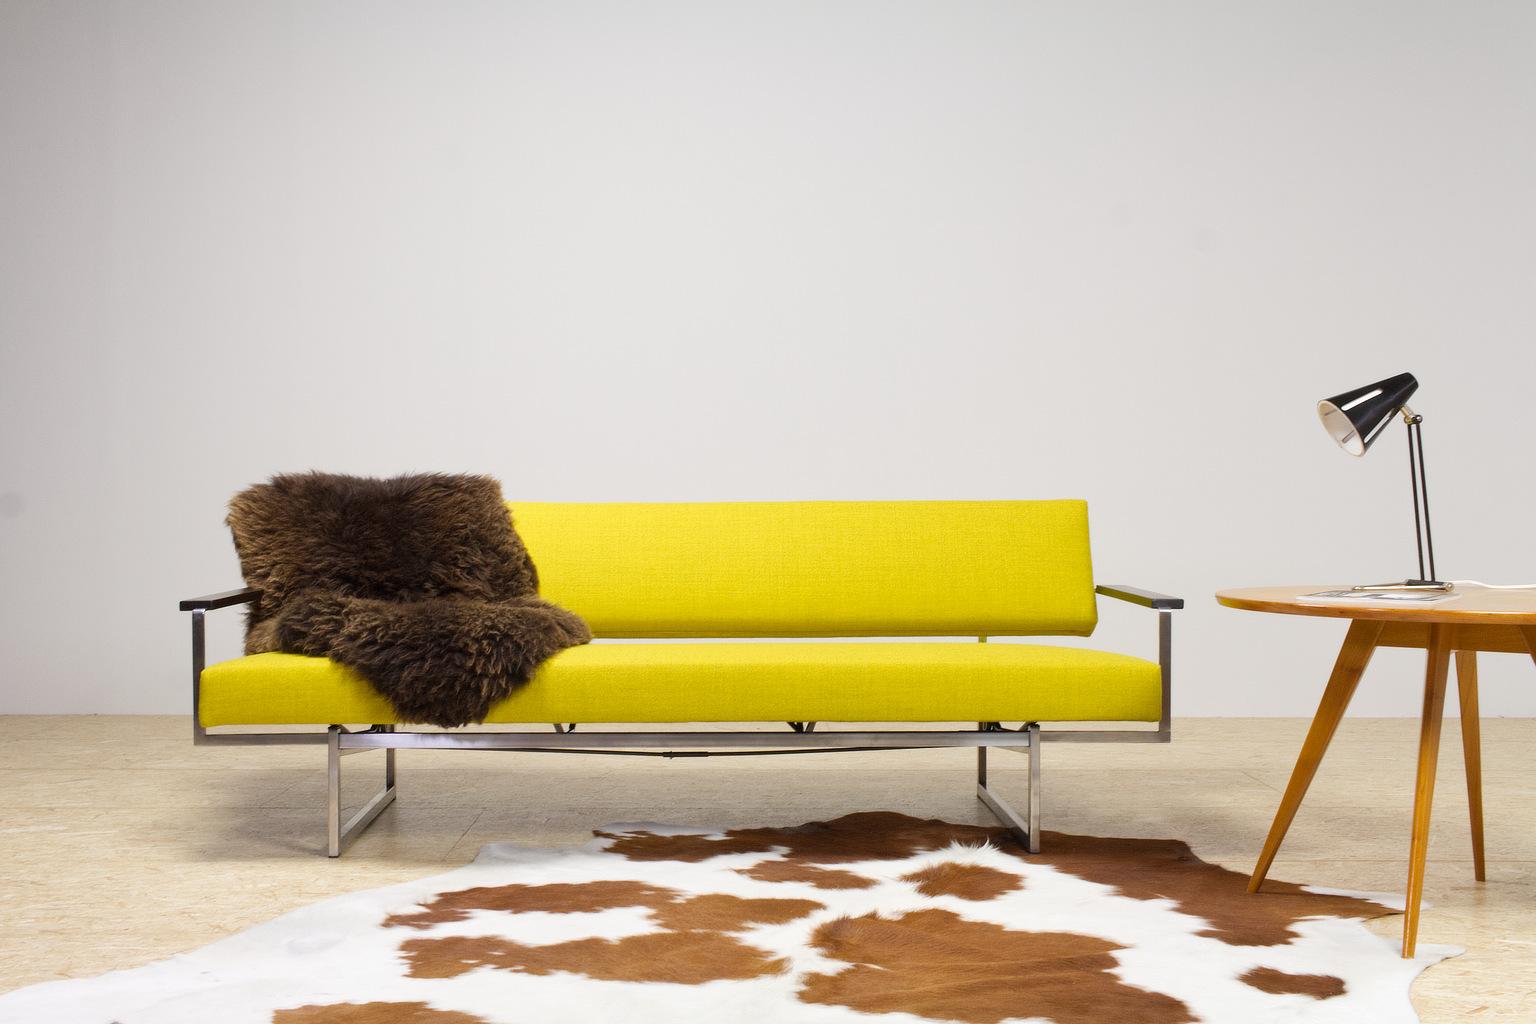 Modest yet modern sofa, model Lotus 25, designed by Dutch Industrial designer Rob Parry for Gelderland, 1960s. The industrial design is completely restored and re-upholstered in a high quality yellow wool furniture fabric. The yellow color of the